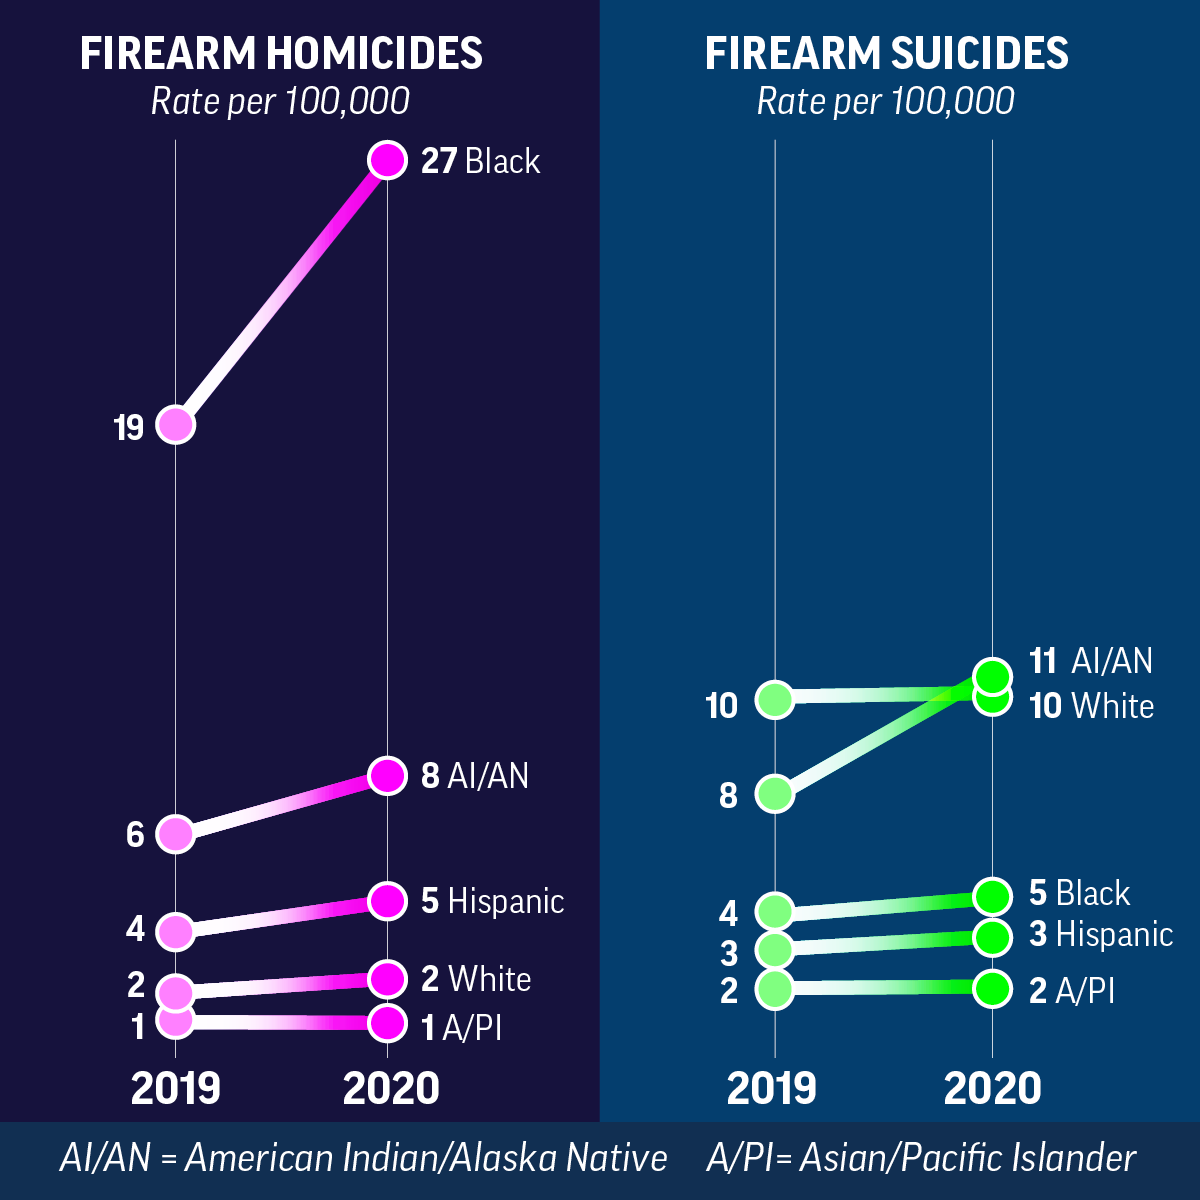 Graph showing firearm homicides and suicides increased for some racial/ethnic groups